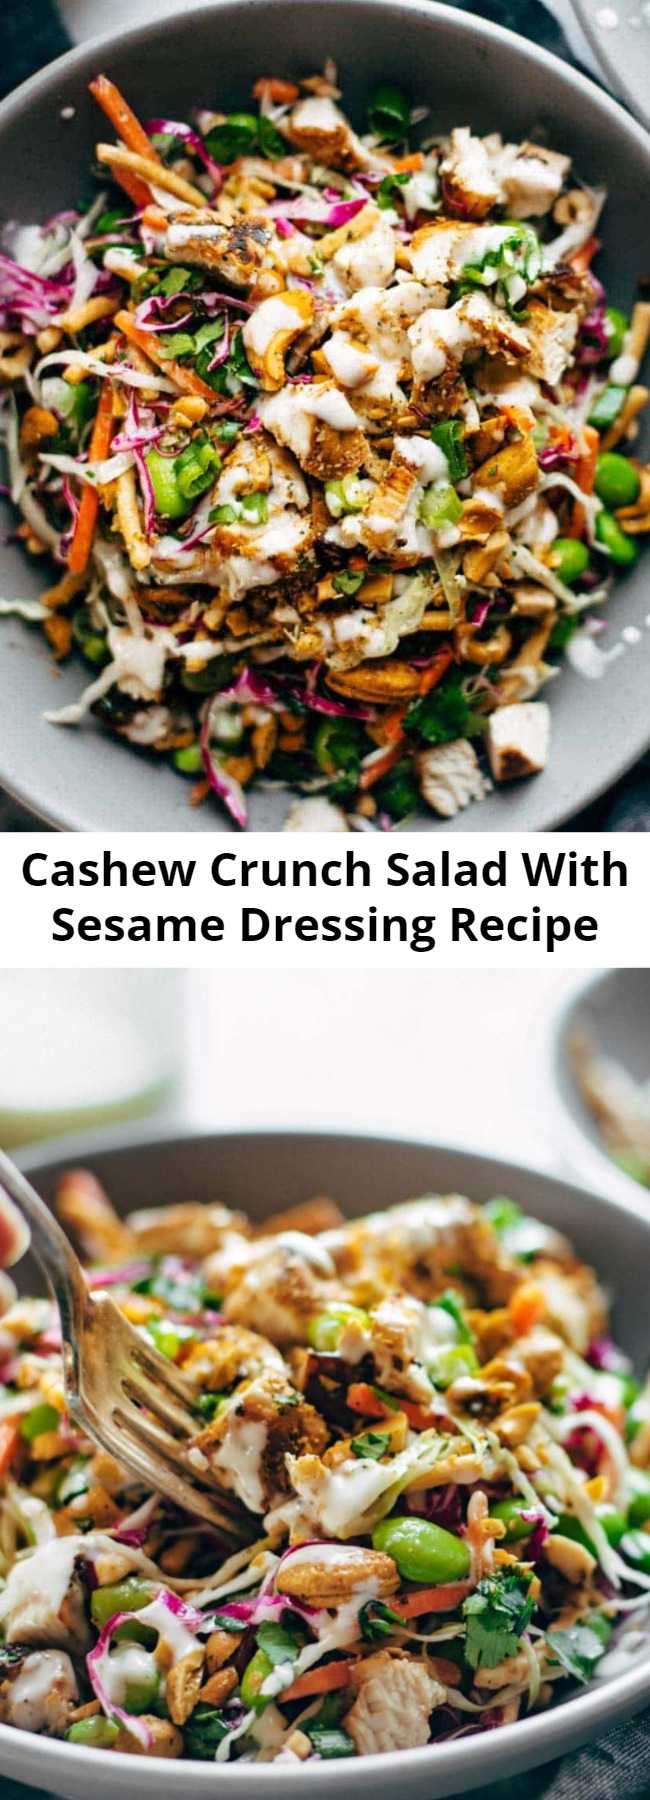 Cashew Crunch Salad With Sesame Dressing Recipe - Cashew Crunch Salad with Sesame Dressing – this is the healthy summer recipe that makes me ACTUALLY WANT TO EAT A SALAD. #healthy #summer #healthysummerrecipe #salad #cashew